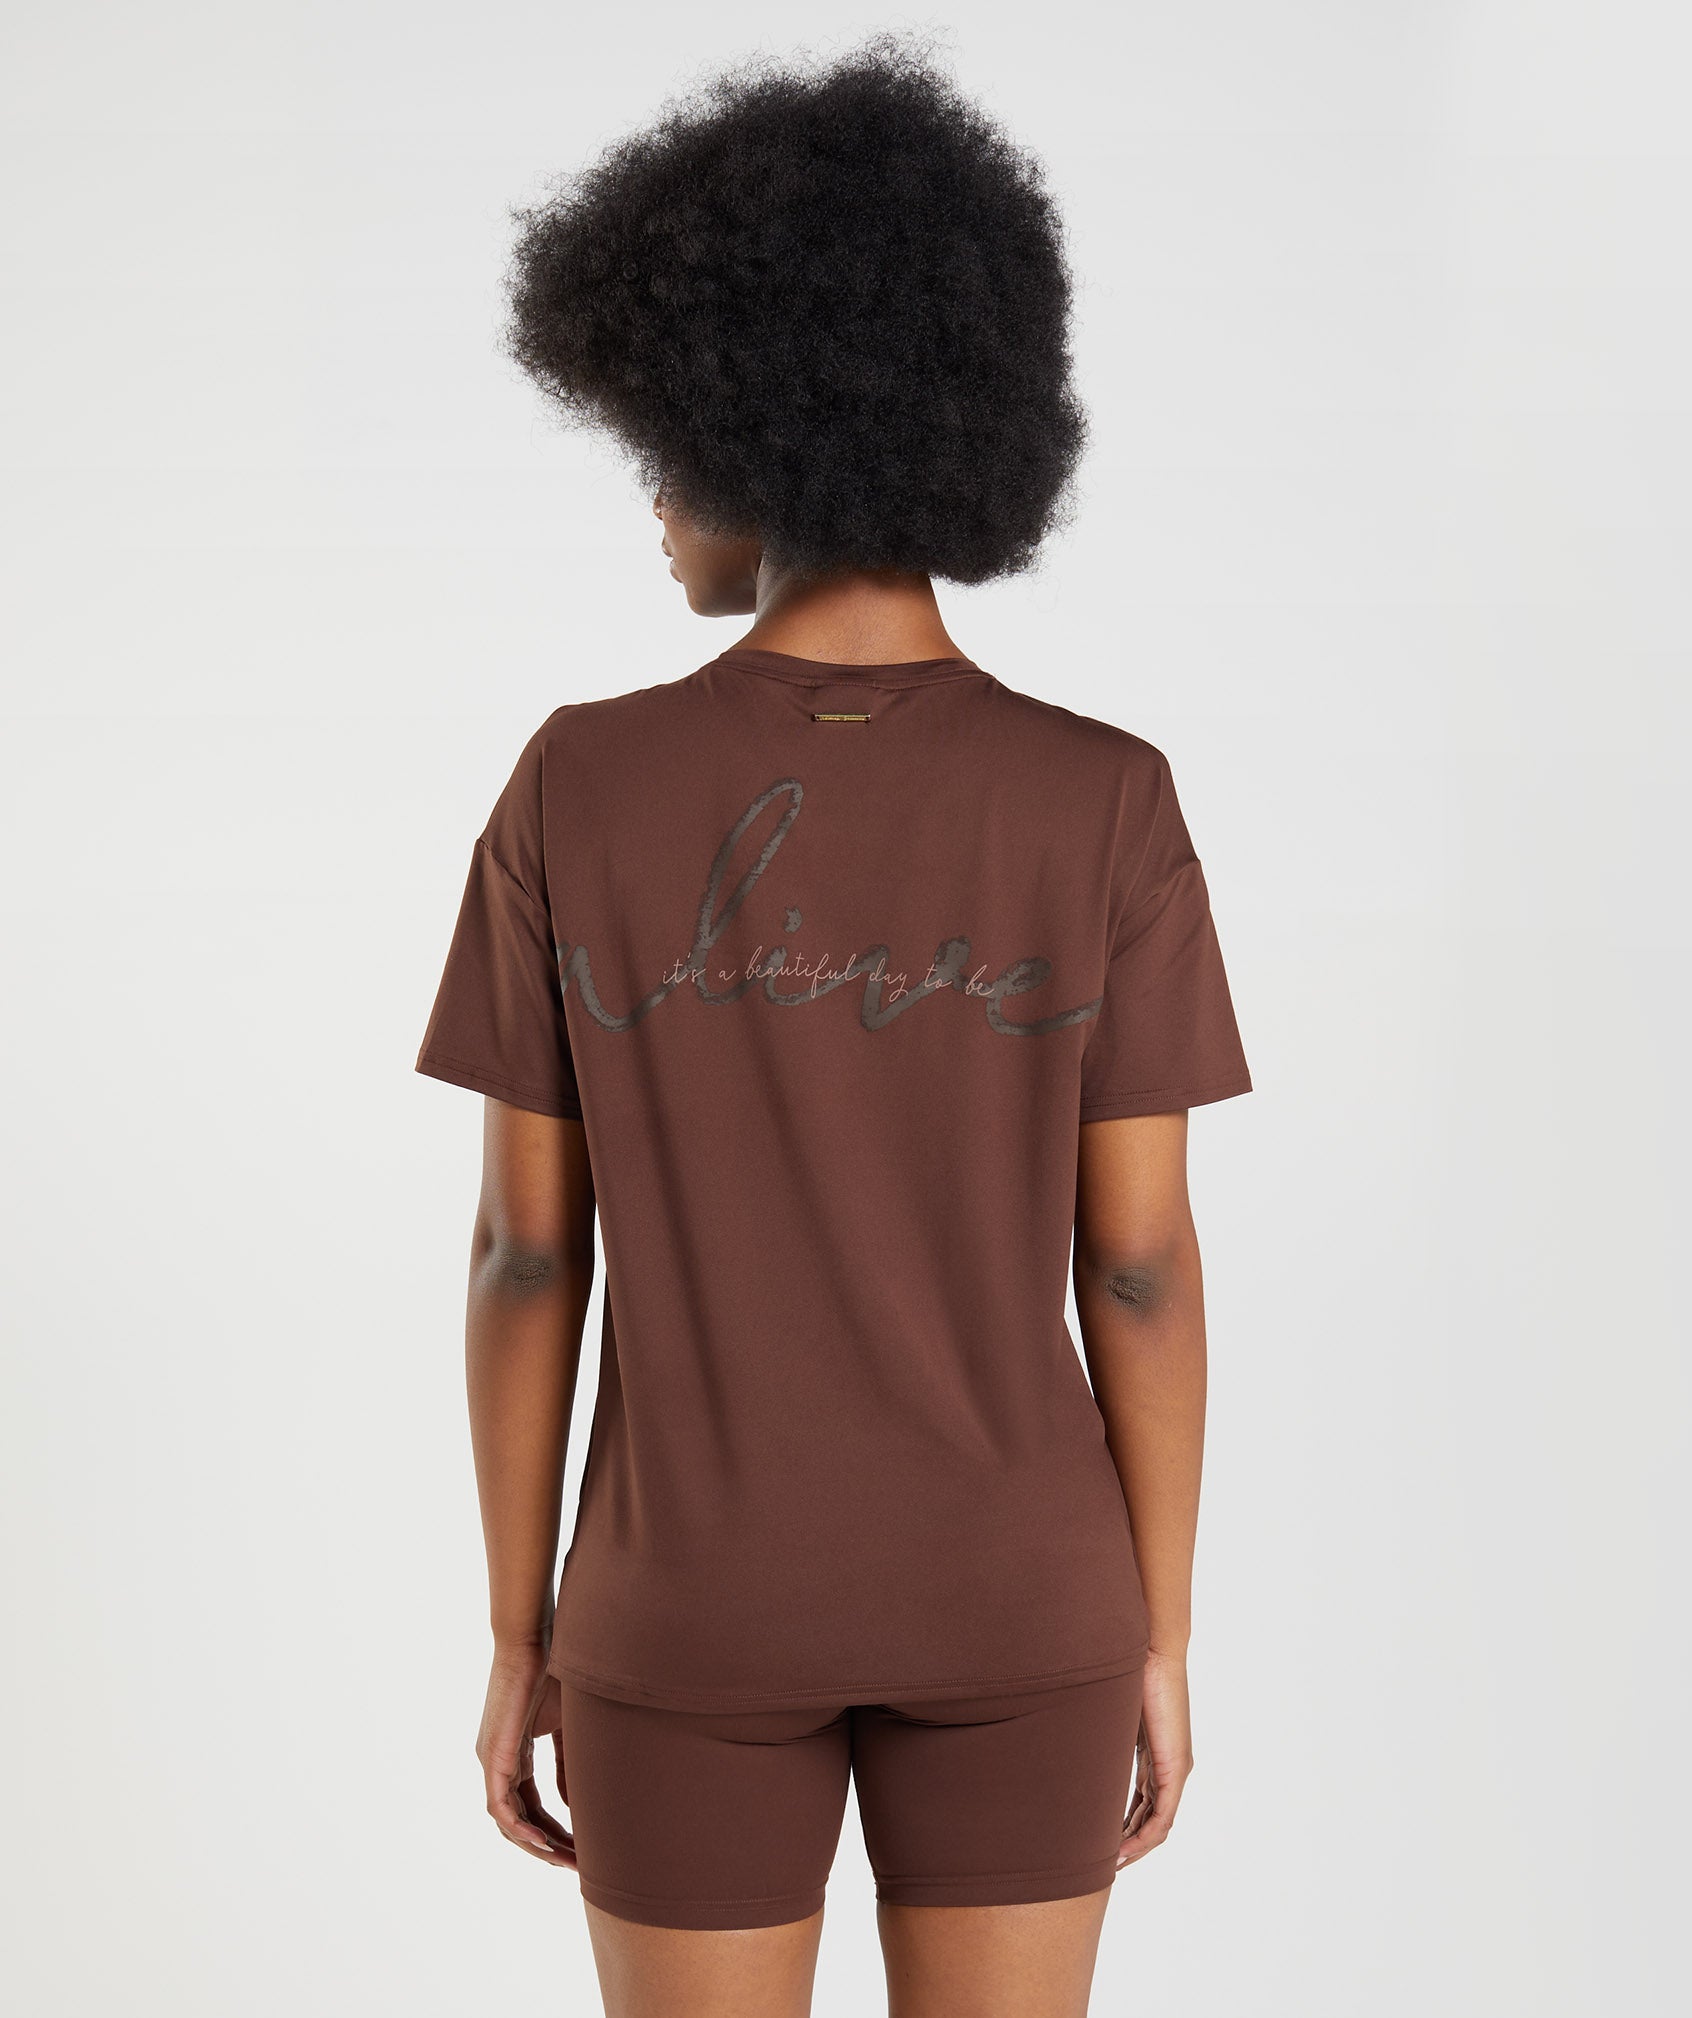 Whitney Oversized T-Shirt in Rekindle Brown - view 2